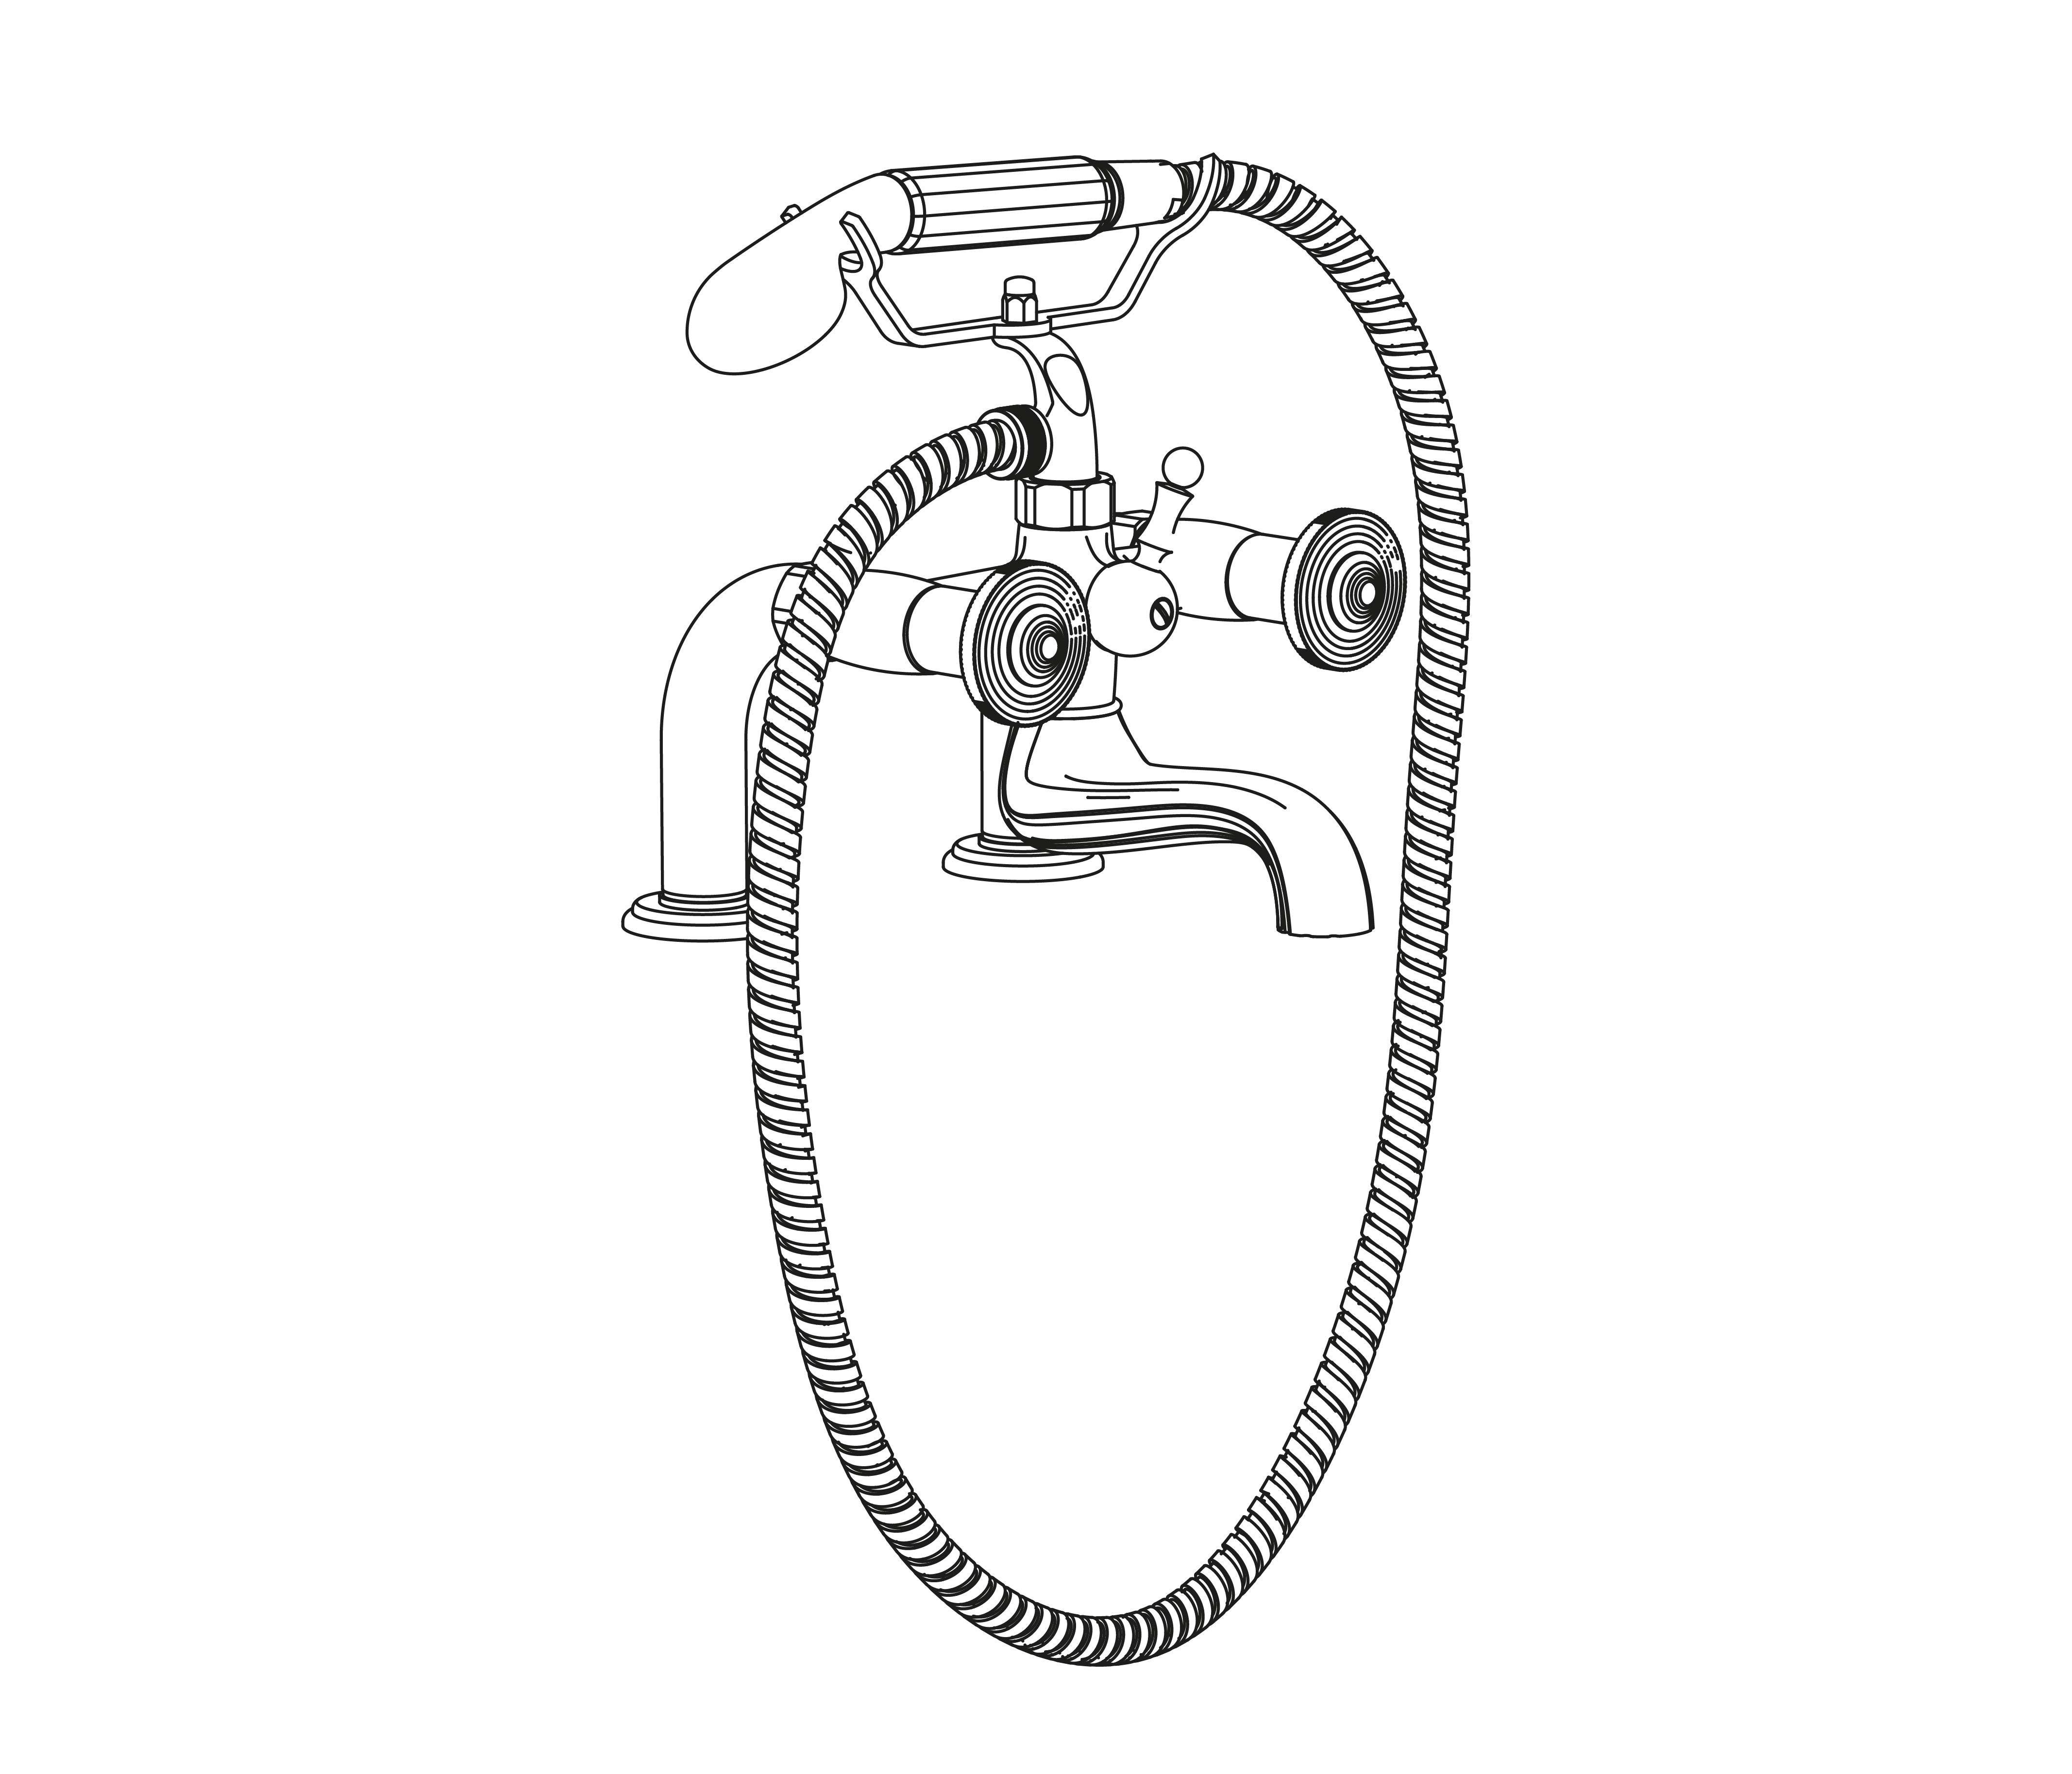 C37-3306 Rim mounted bath and shower mixer